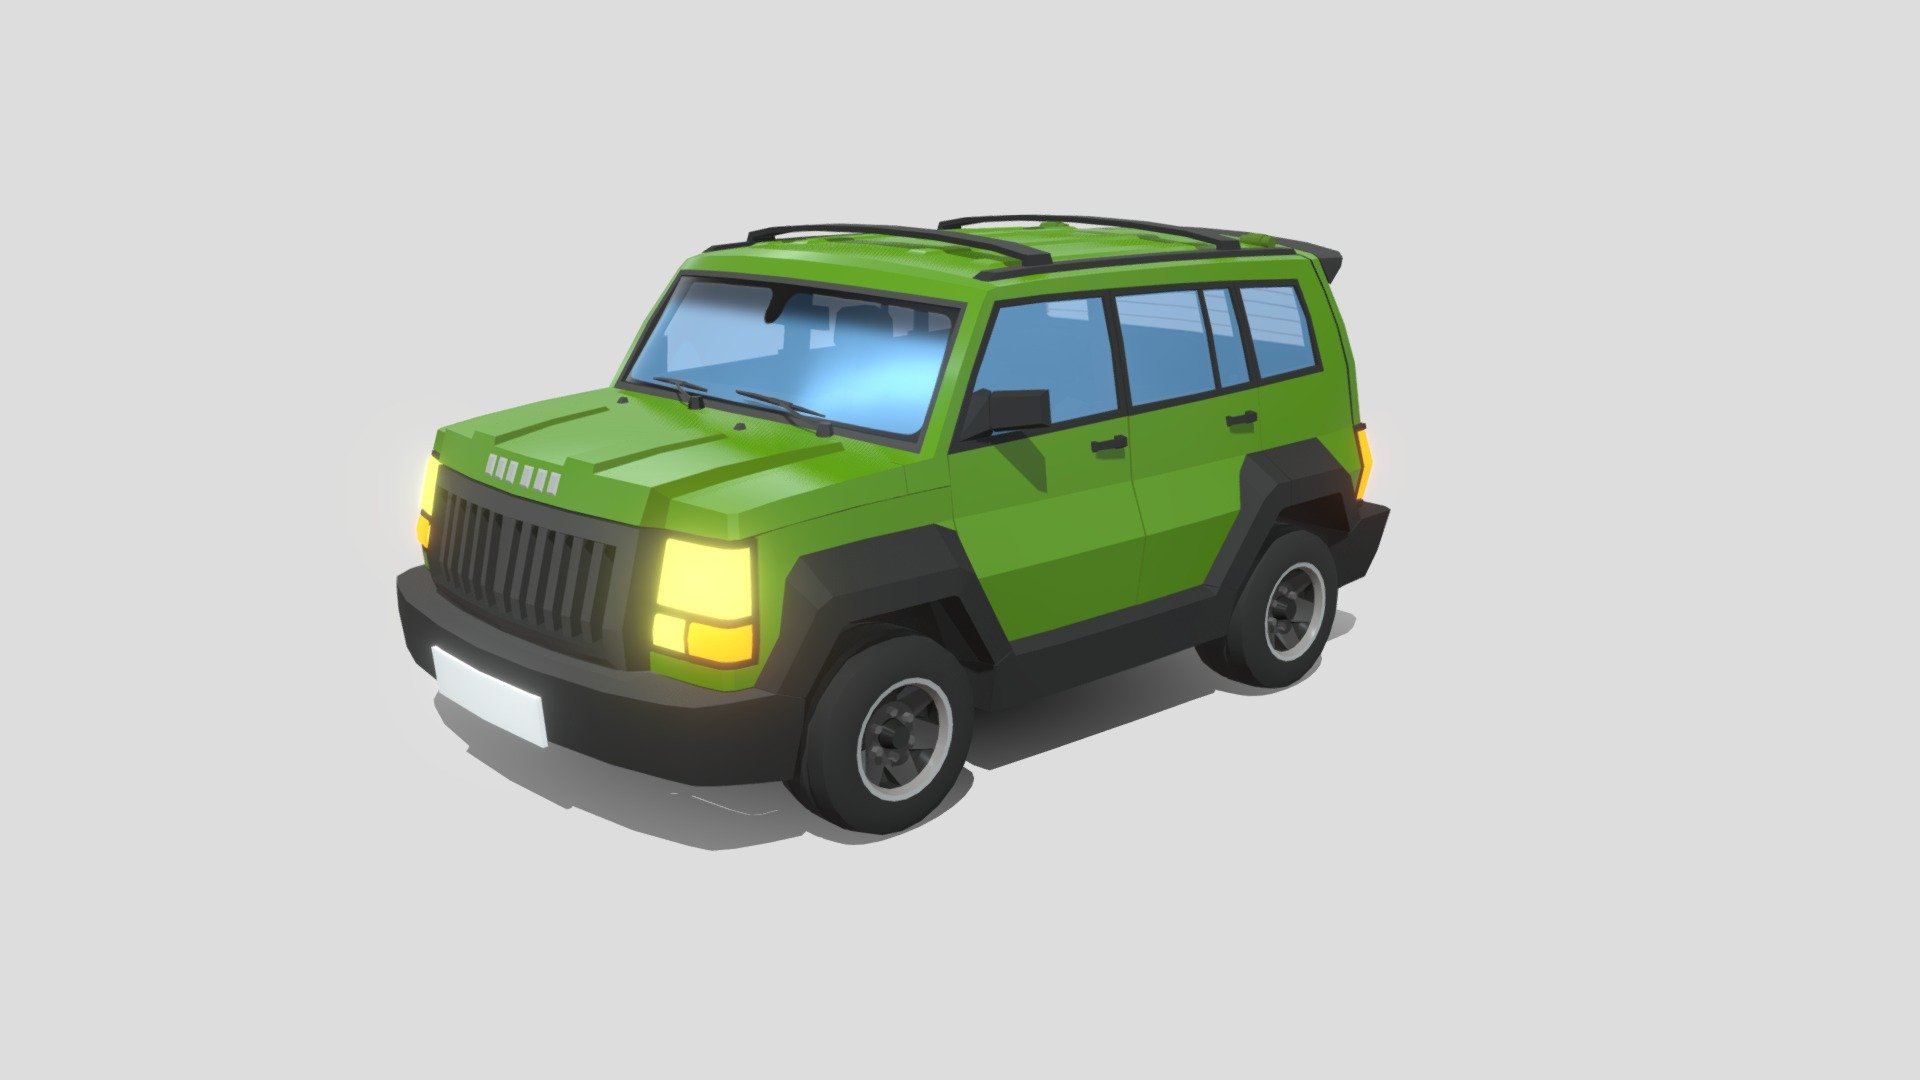 Car for your game or animation. You can disassemble it or blow it up in peaces. Have fun with it!
This model is part of still growing collection:
https://skfb.ly/ozpn9 - Low poly SUV - Buy Royalty Free 3D model by arturs.vitas 3d model